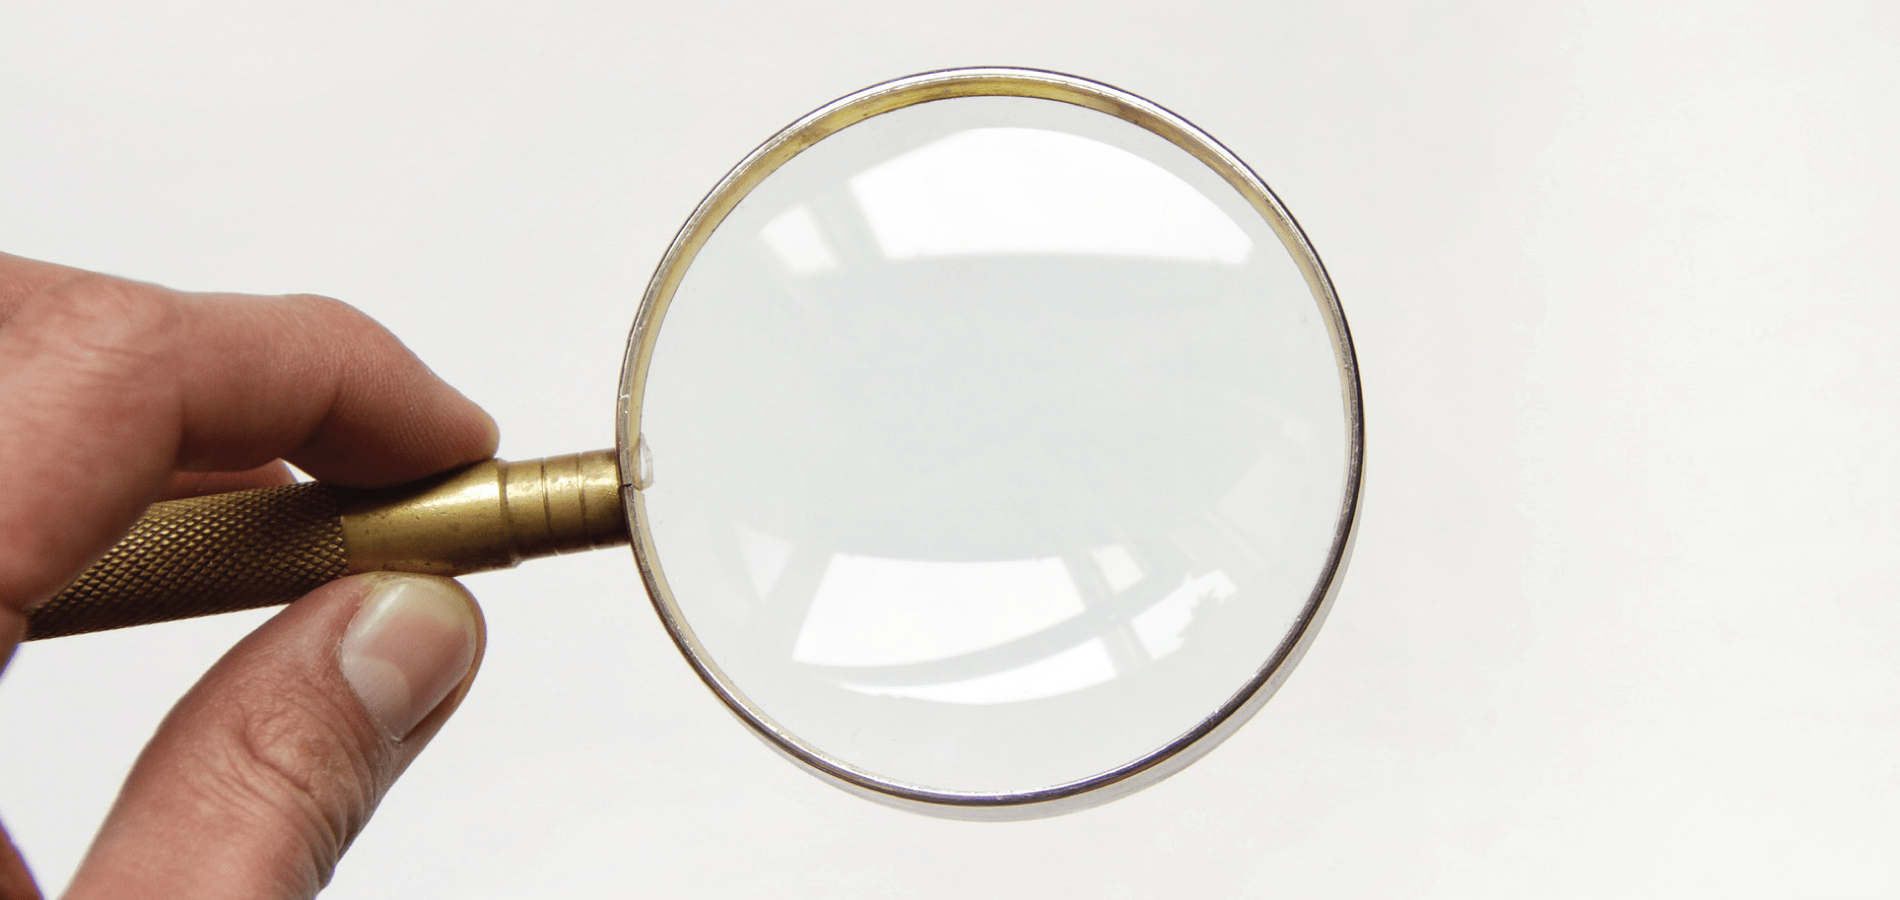 image of hand holding a magnifying glass